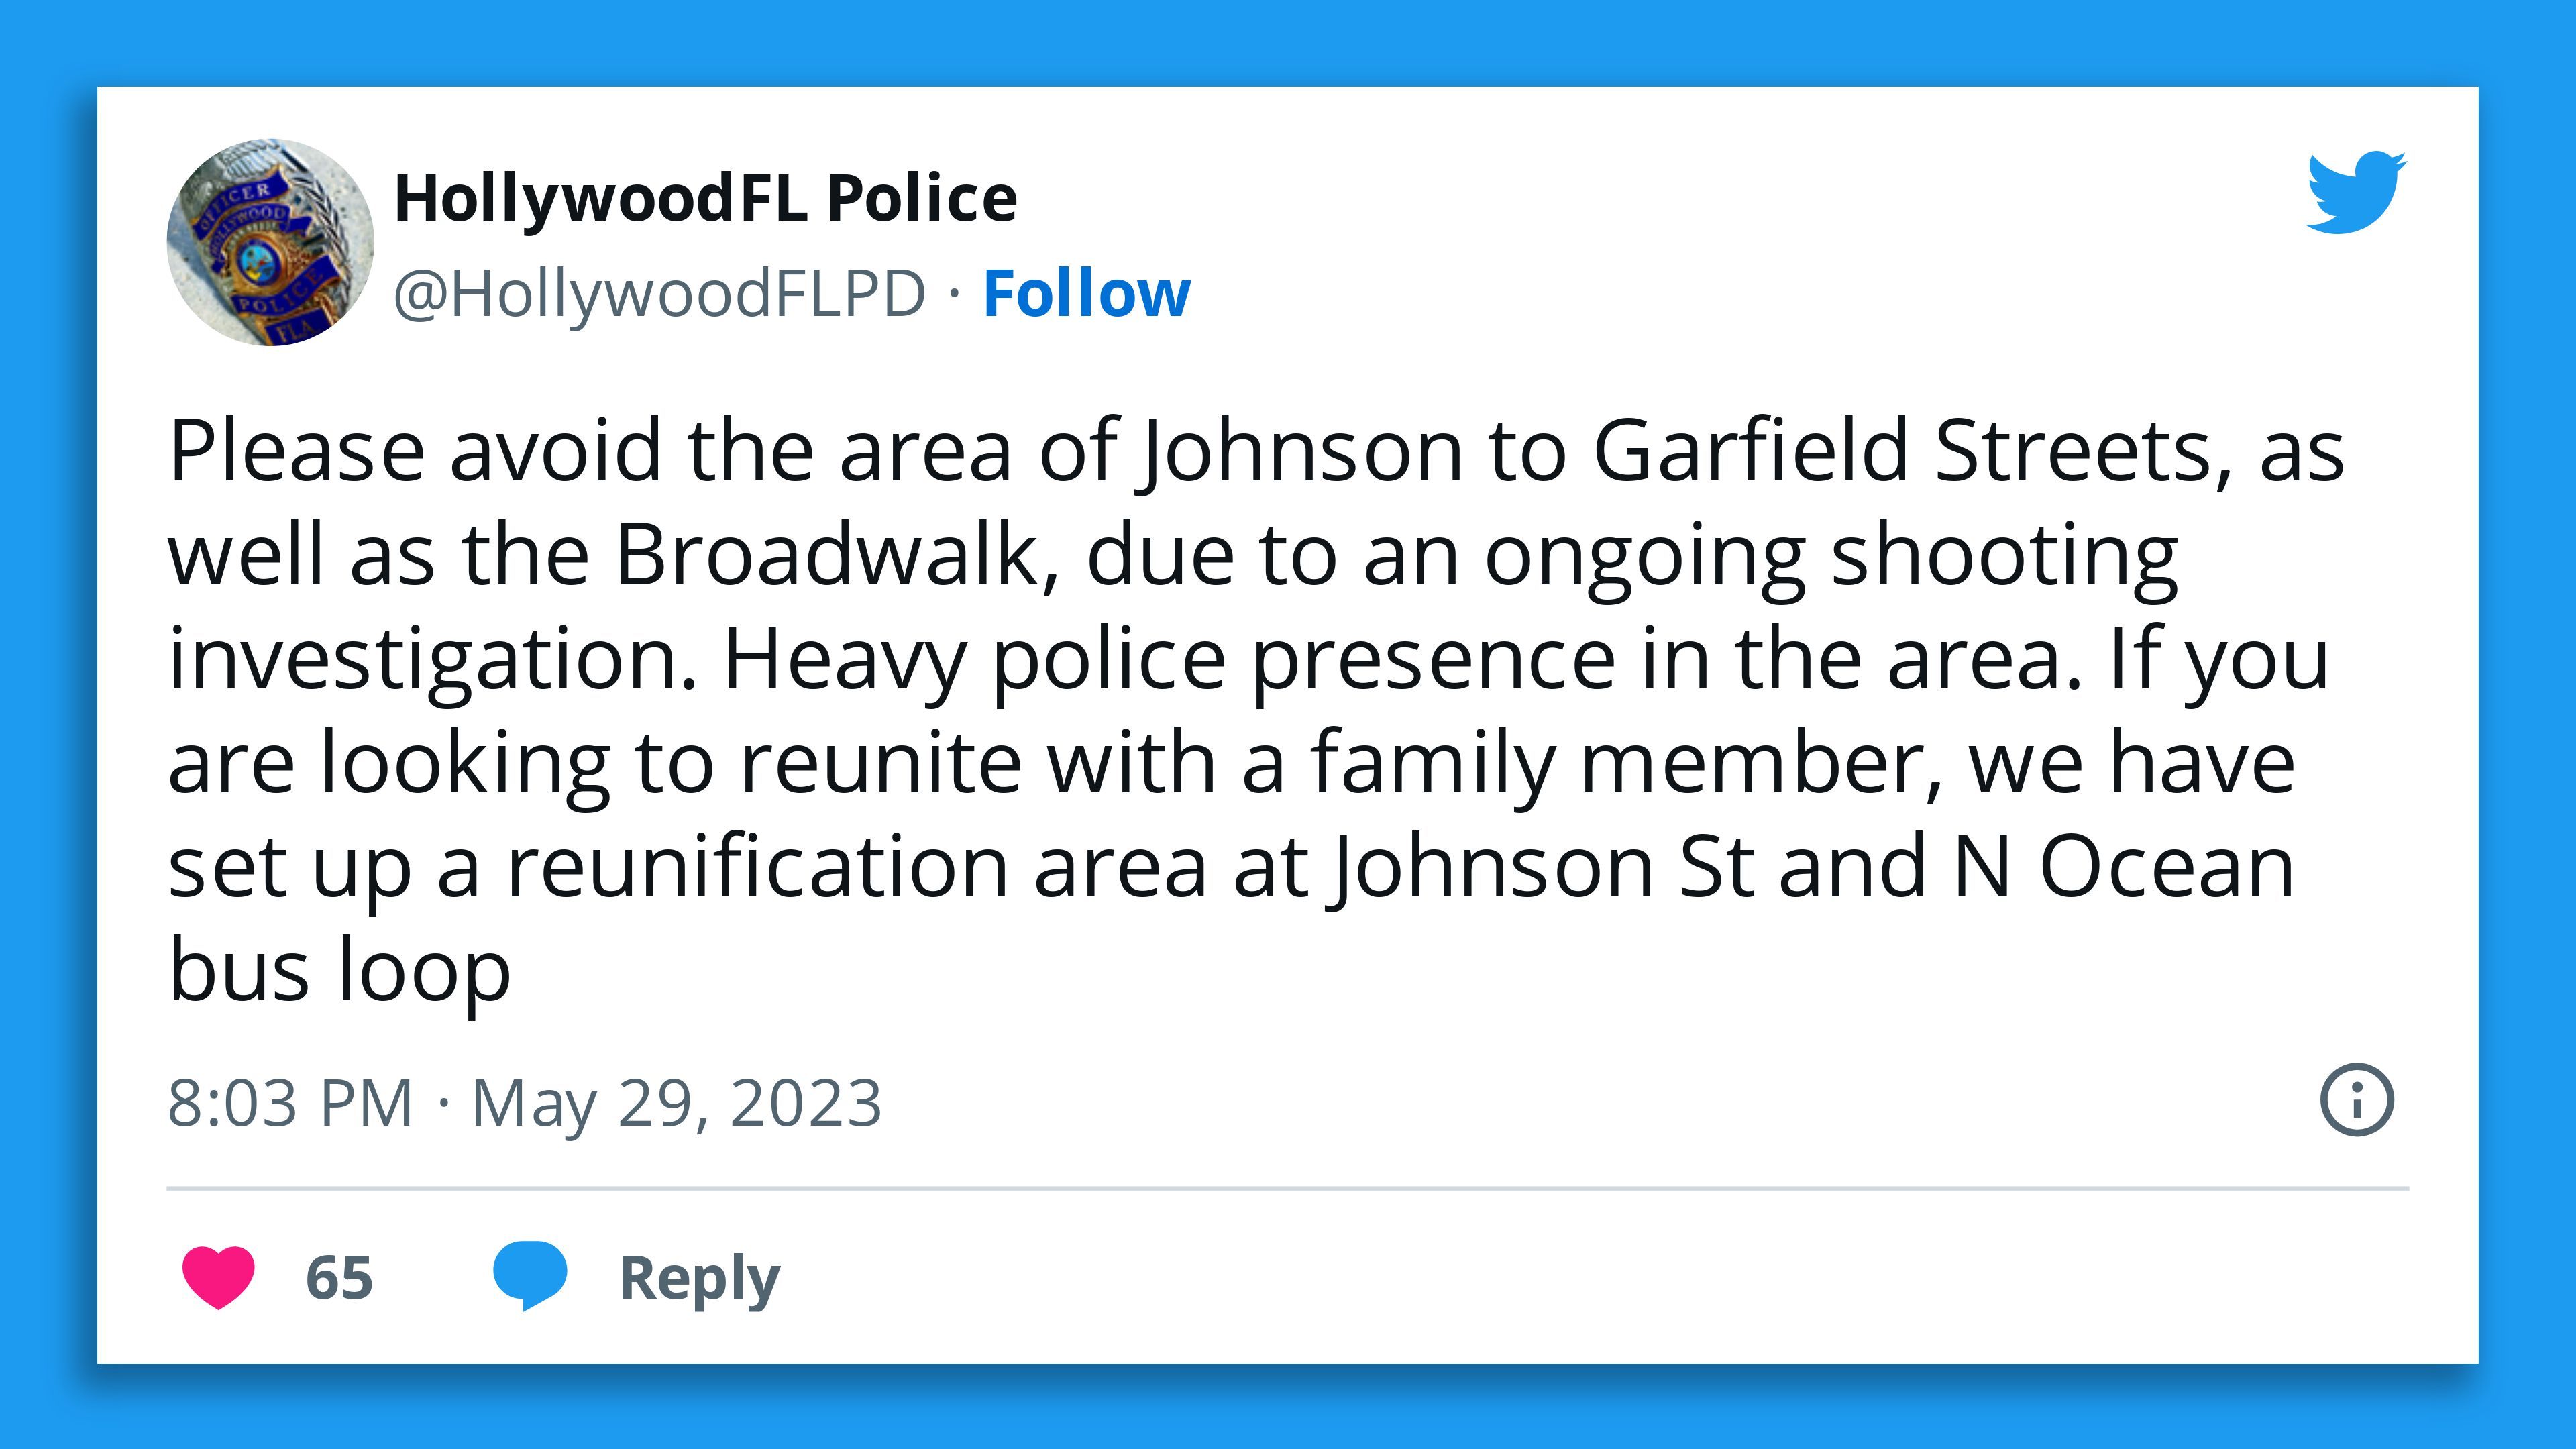 A screenshot of a Hollywood, Florida, police tweet saying "Please avoid the area of Johnson to Garfield Streets, as well as the Broadwalk, due to an ongoing shooting investigation. Heavy police presence in the area. If you are looking to reunite with a family member, we have set up a reunification area at Johnson St and N Ocean bus loop."